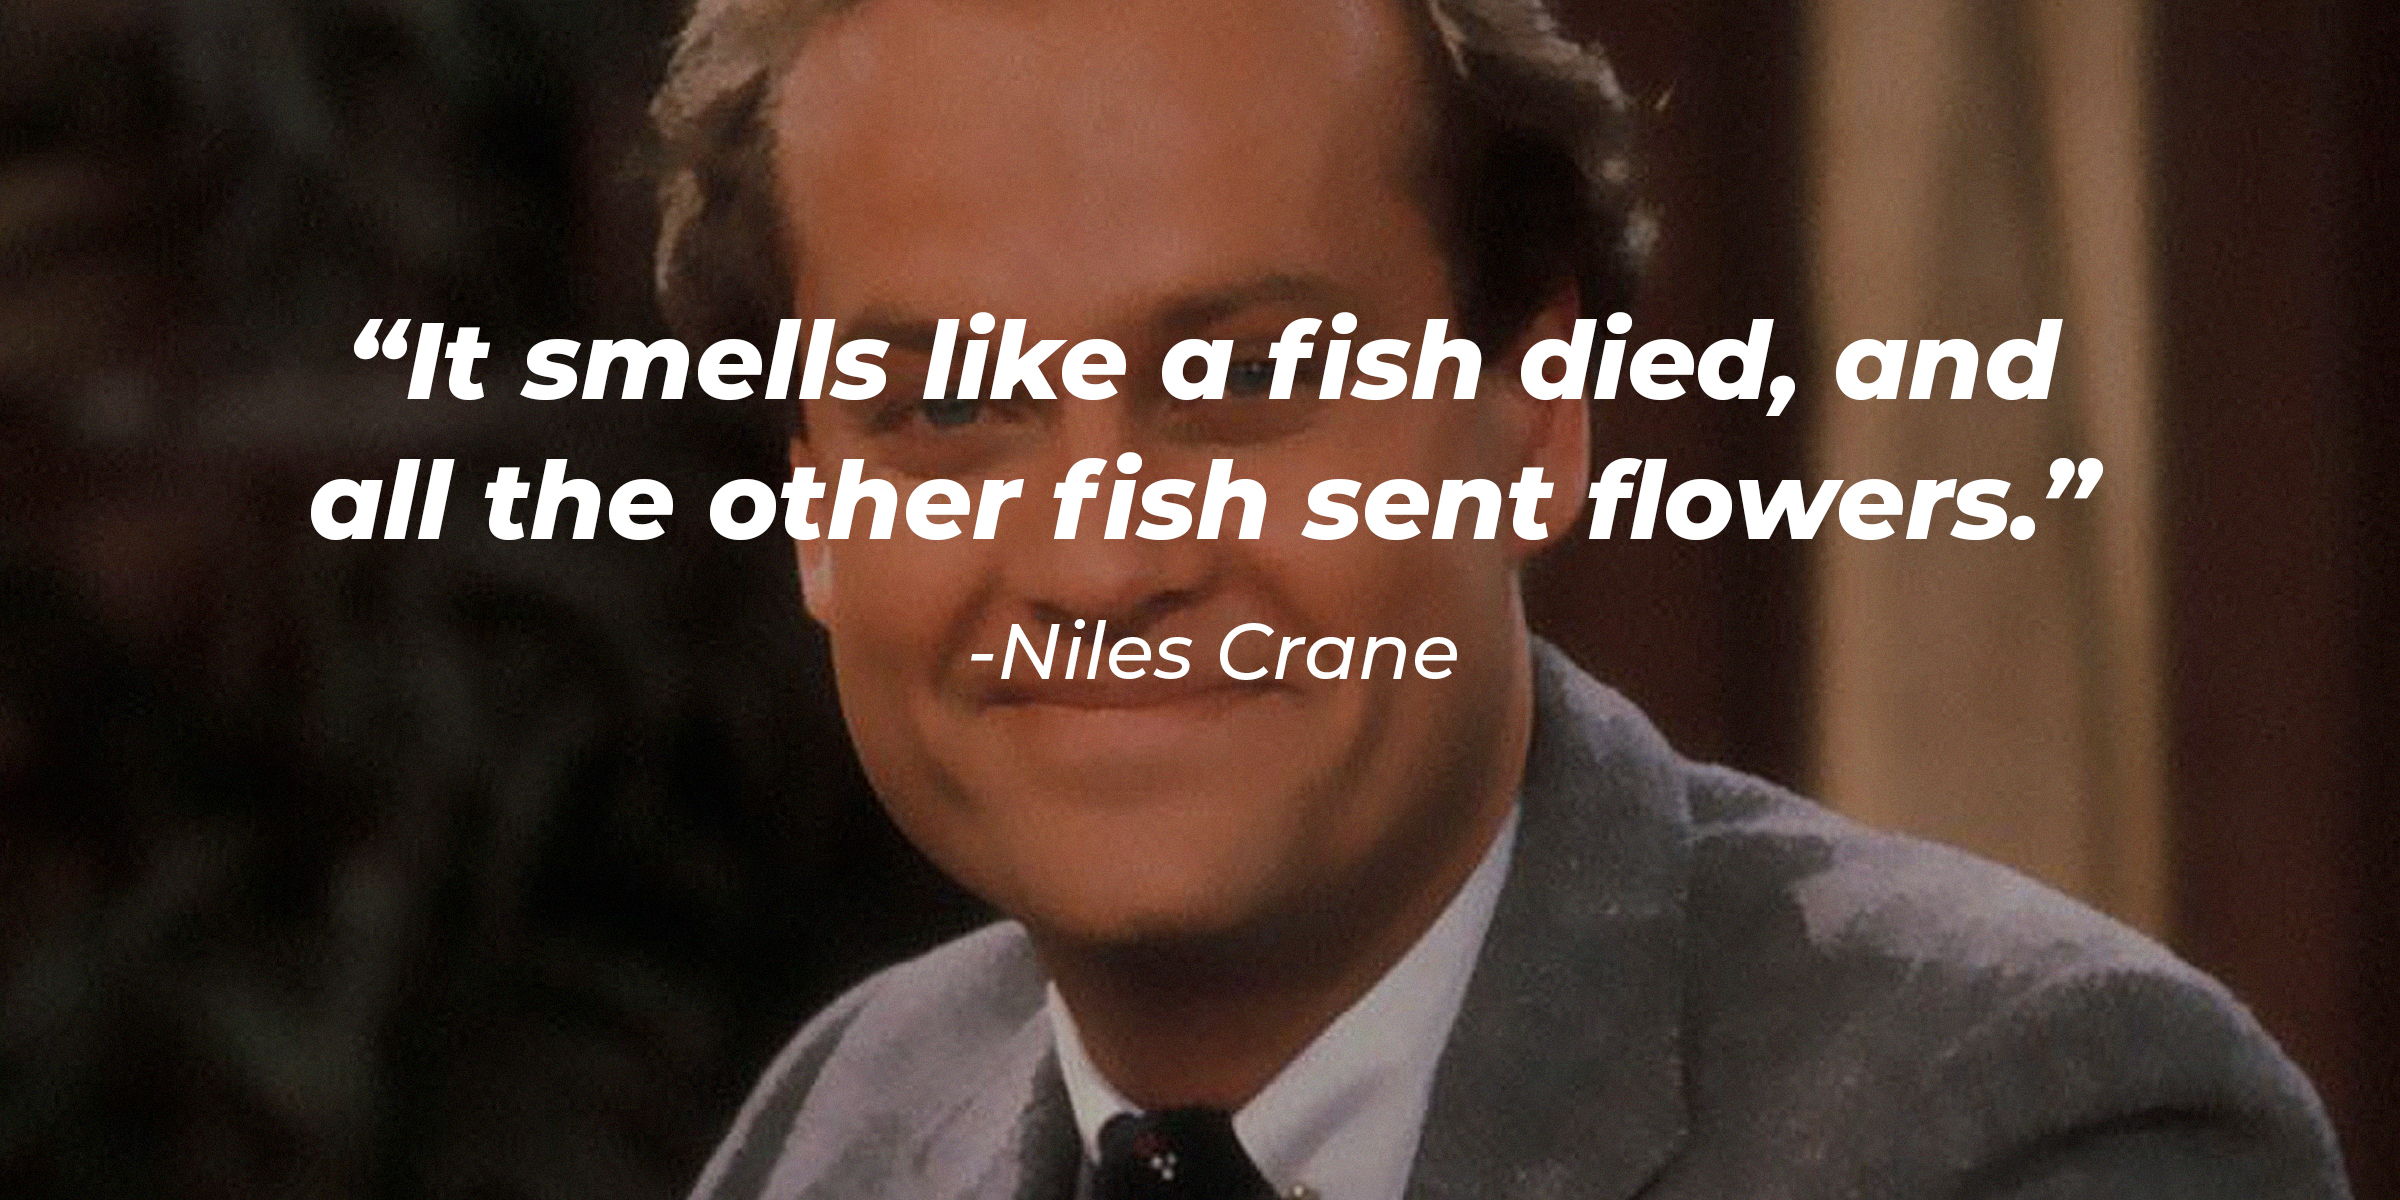 Niles Crane, with his quote: “It smells like a fish died, and all the other fish sent flowers.” | Source: facebook.com/Frasier